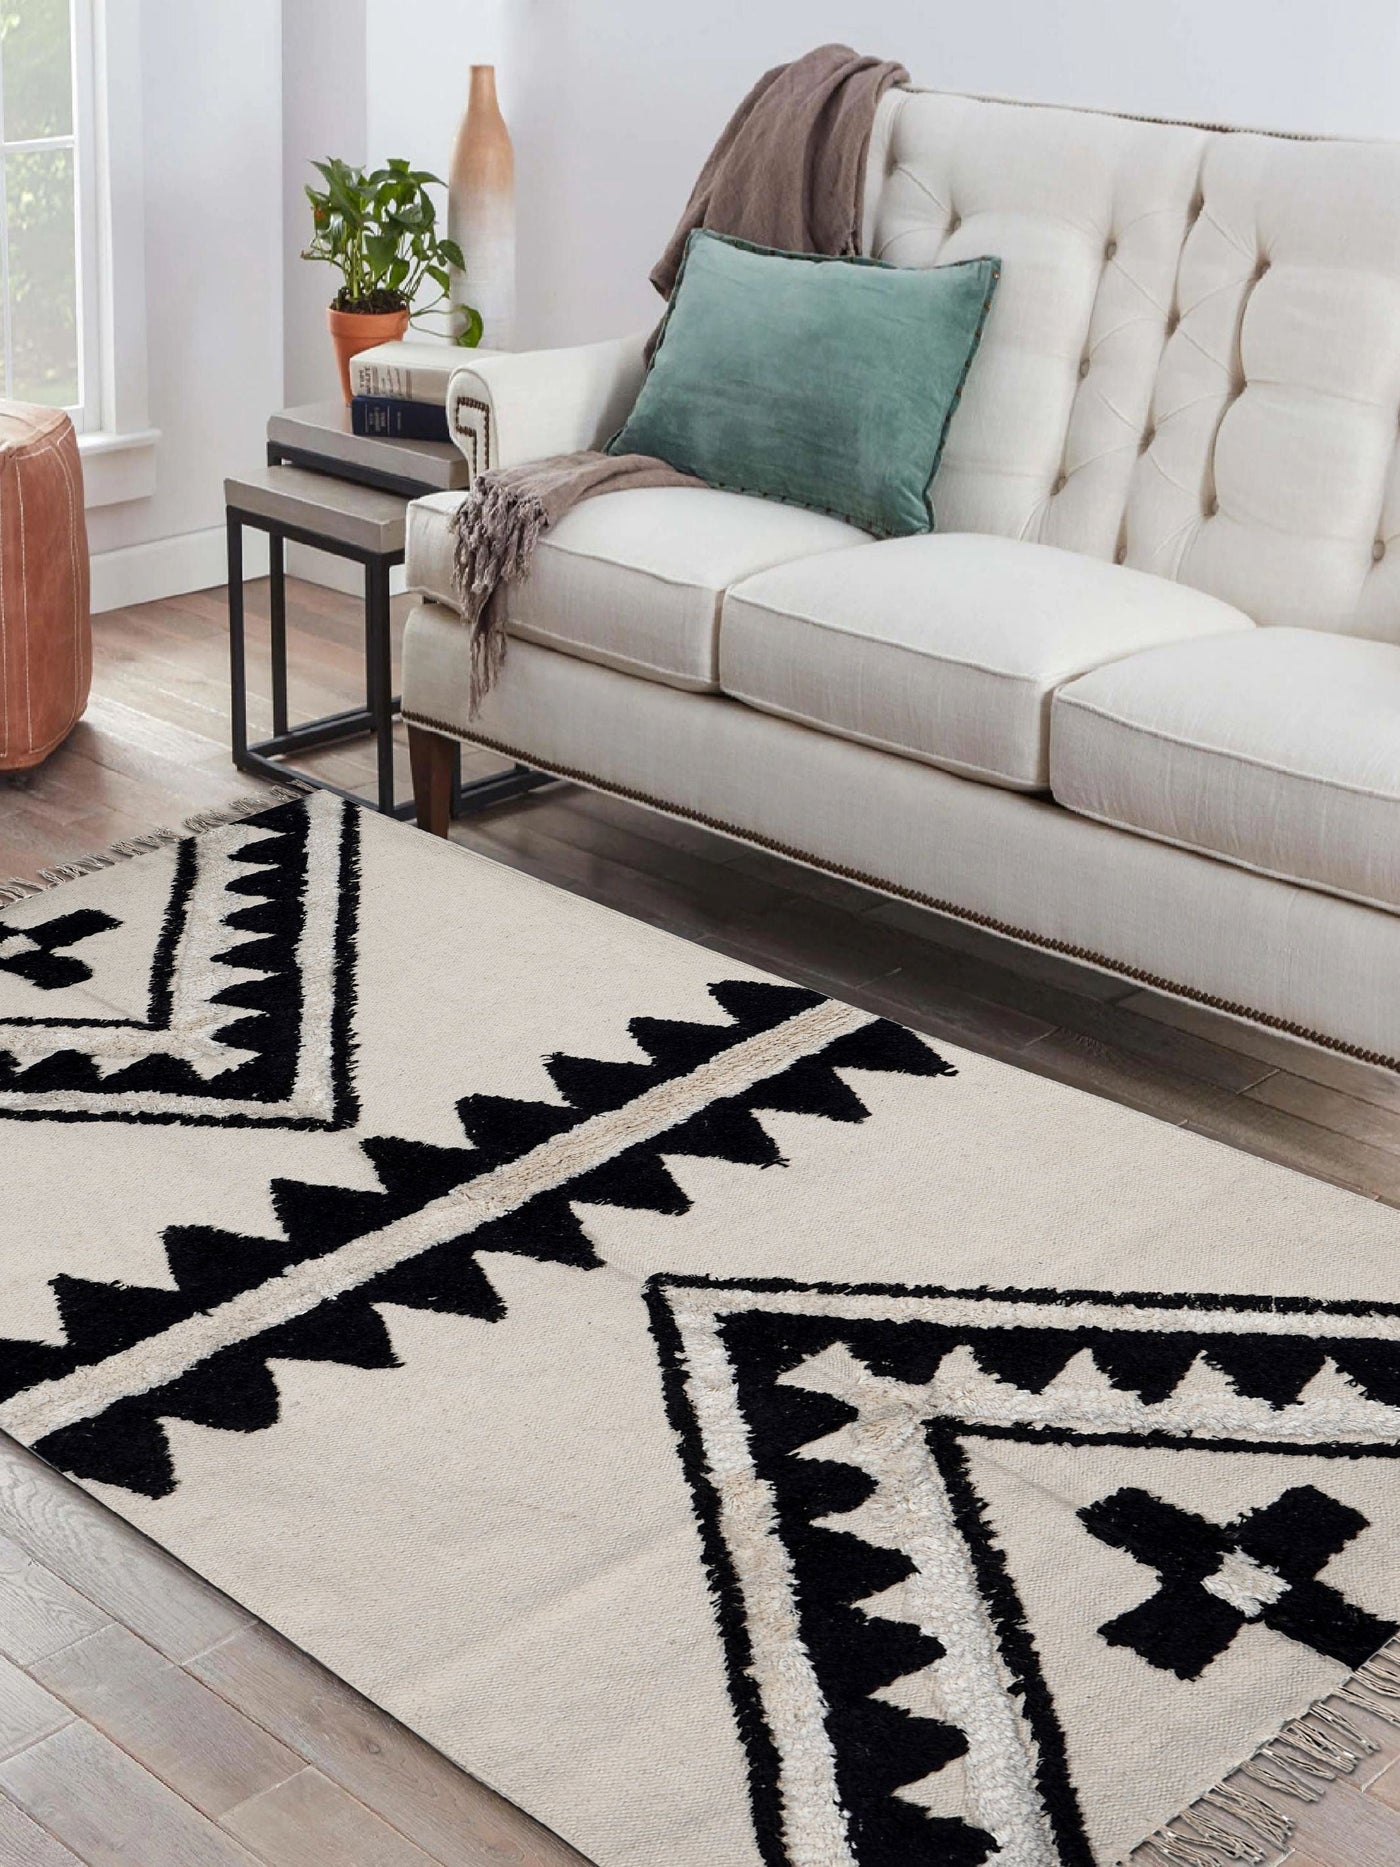 Ters Tufted Rug